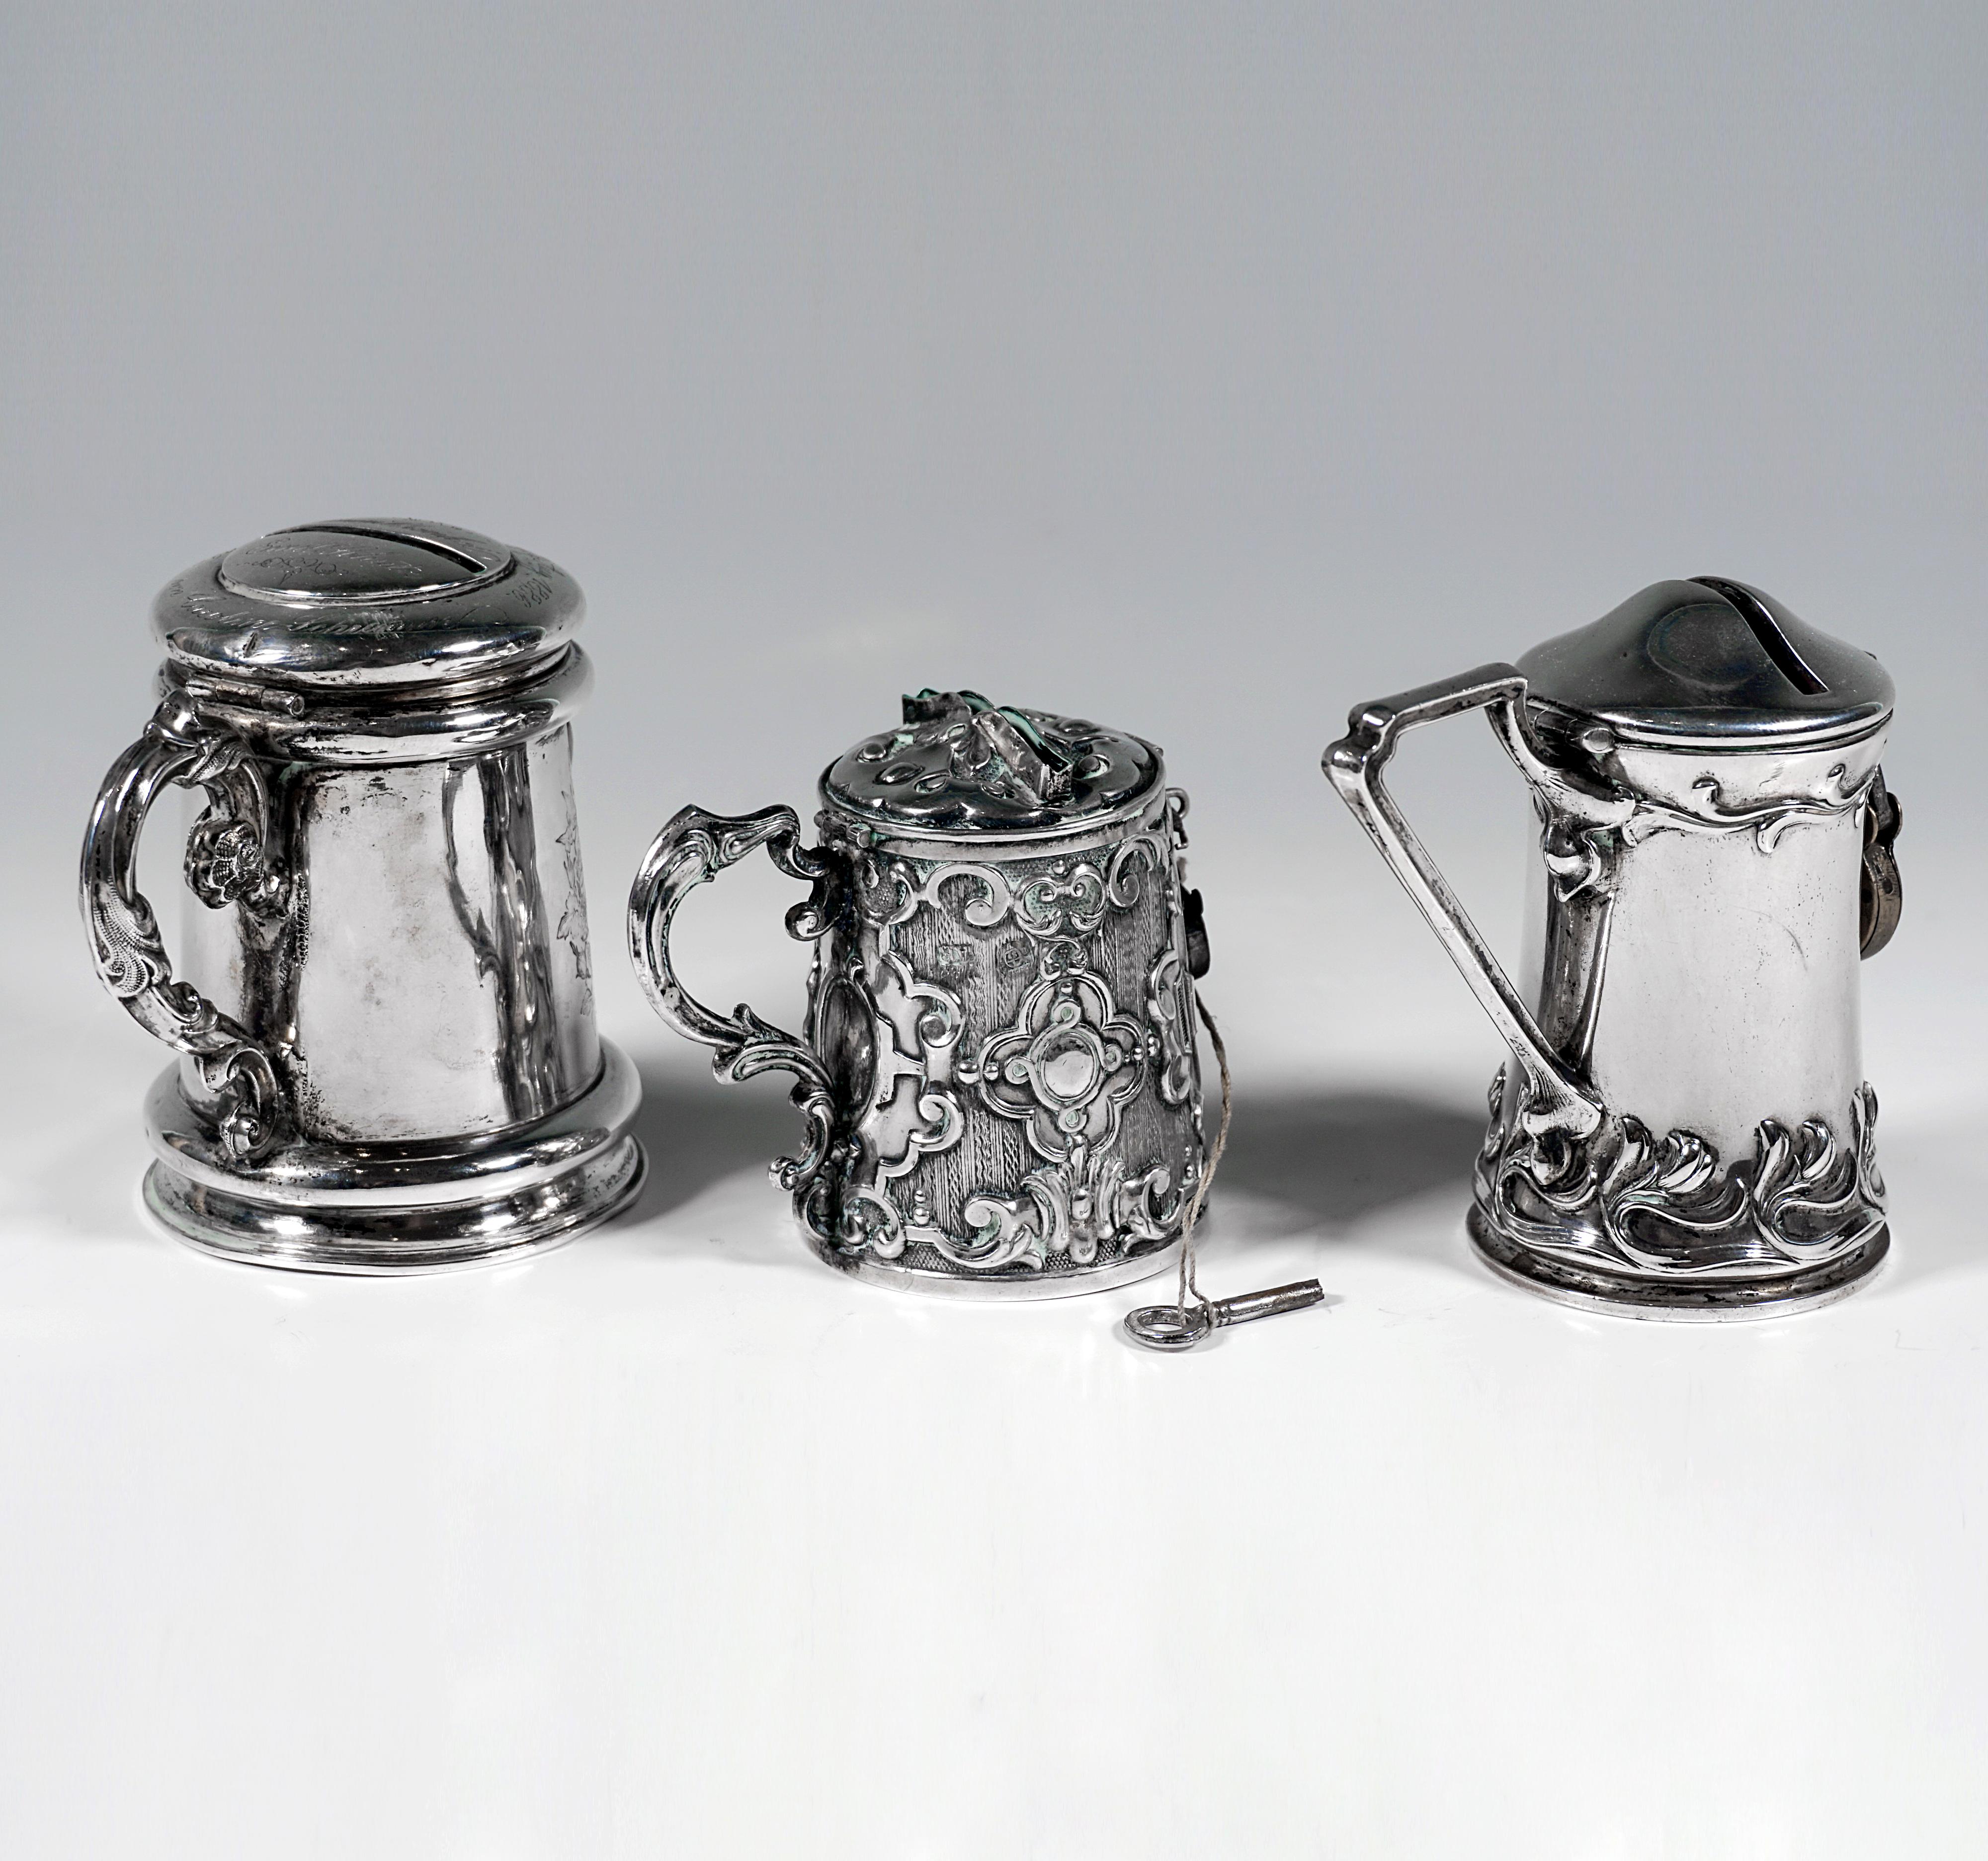 Hand-Crafted 3 Antique Silver Money Boxes, Piggy Banks, Austria-Hungary & Germany, 19th Cent. For Sale